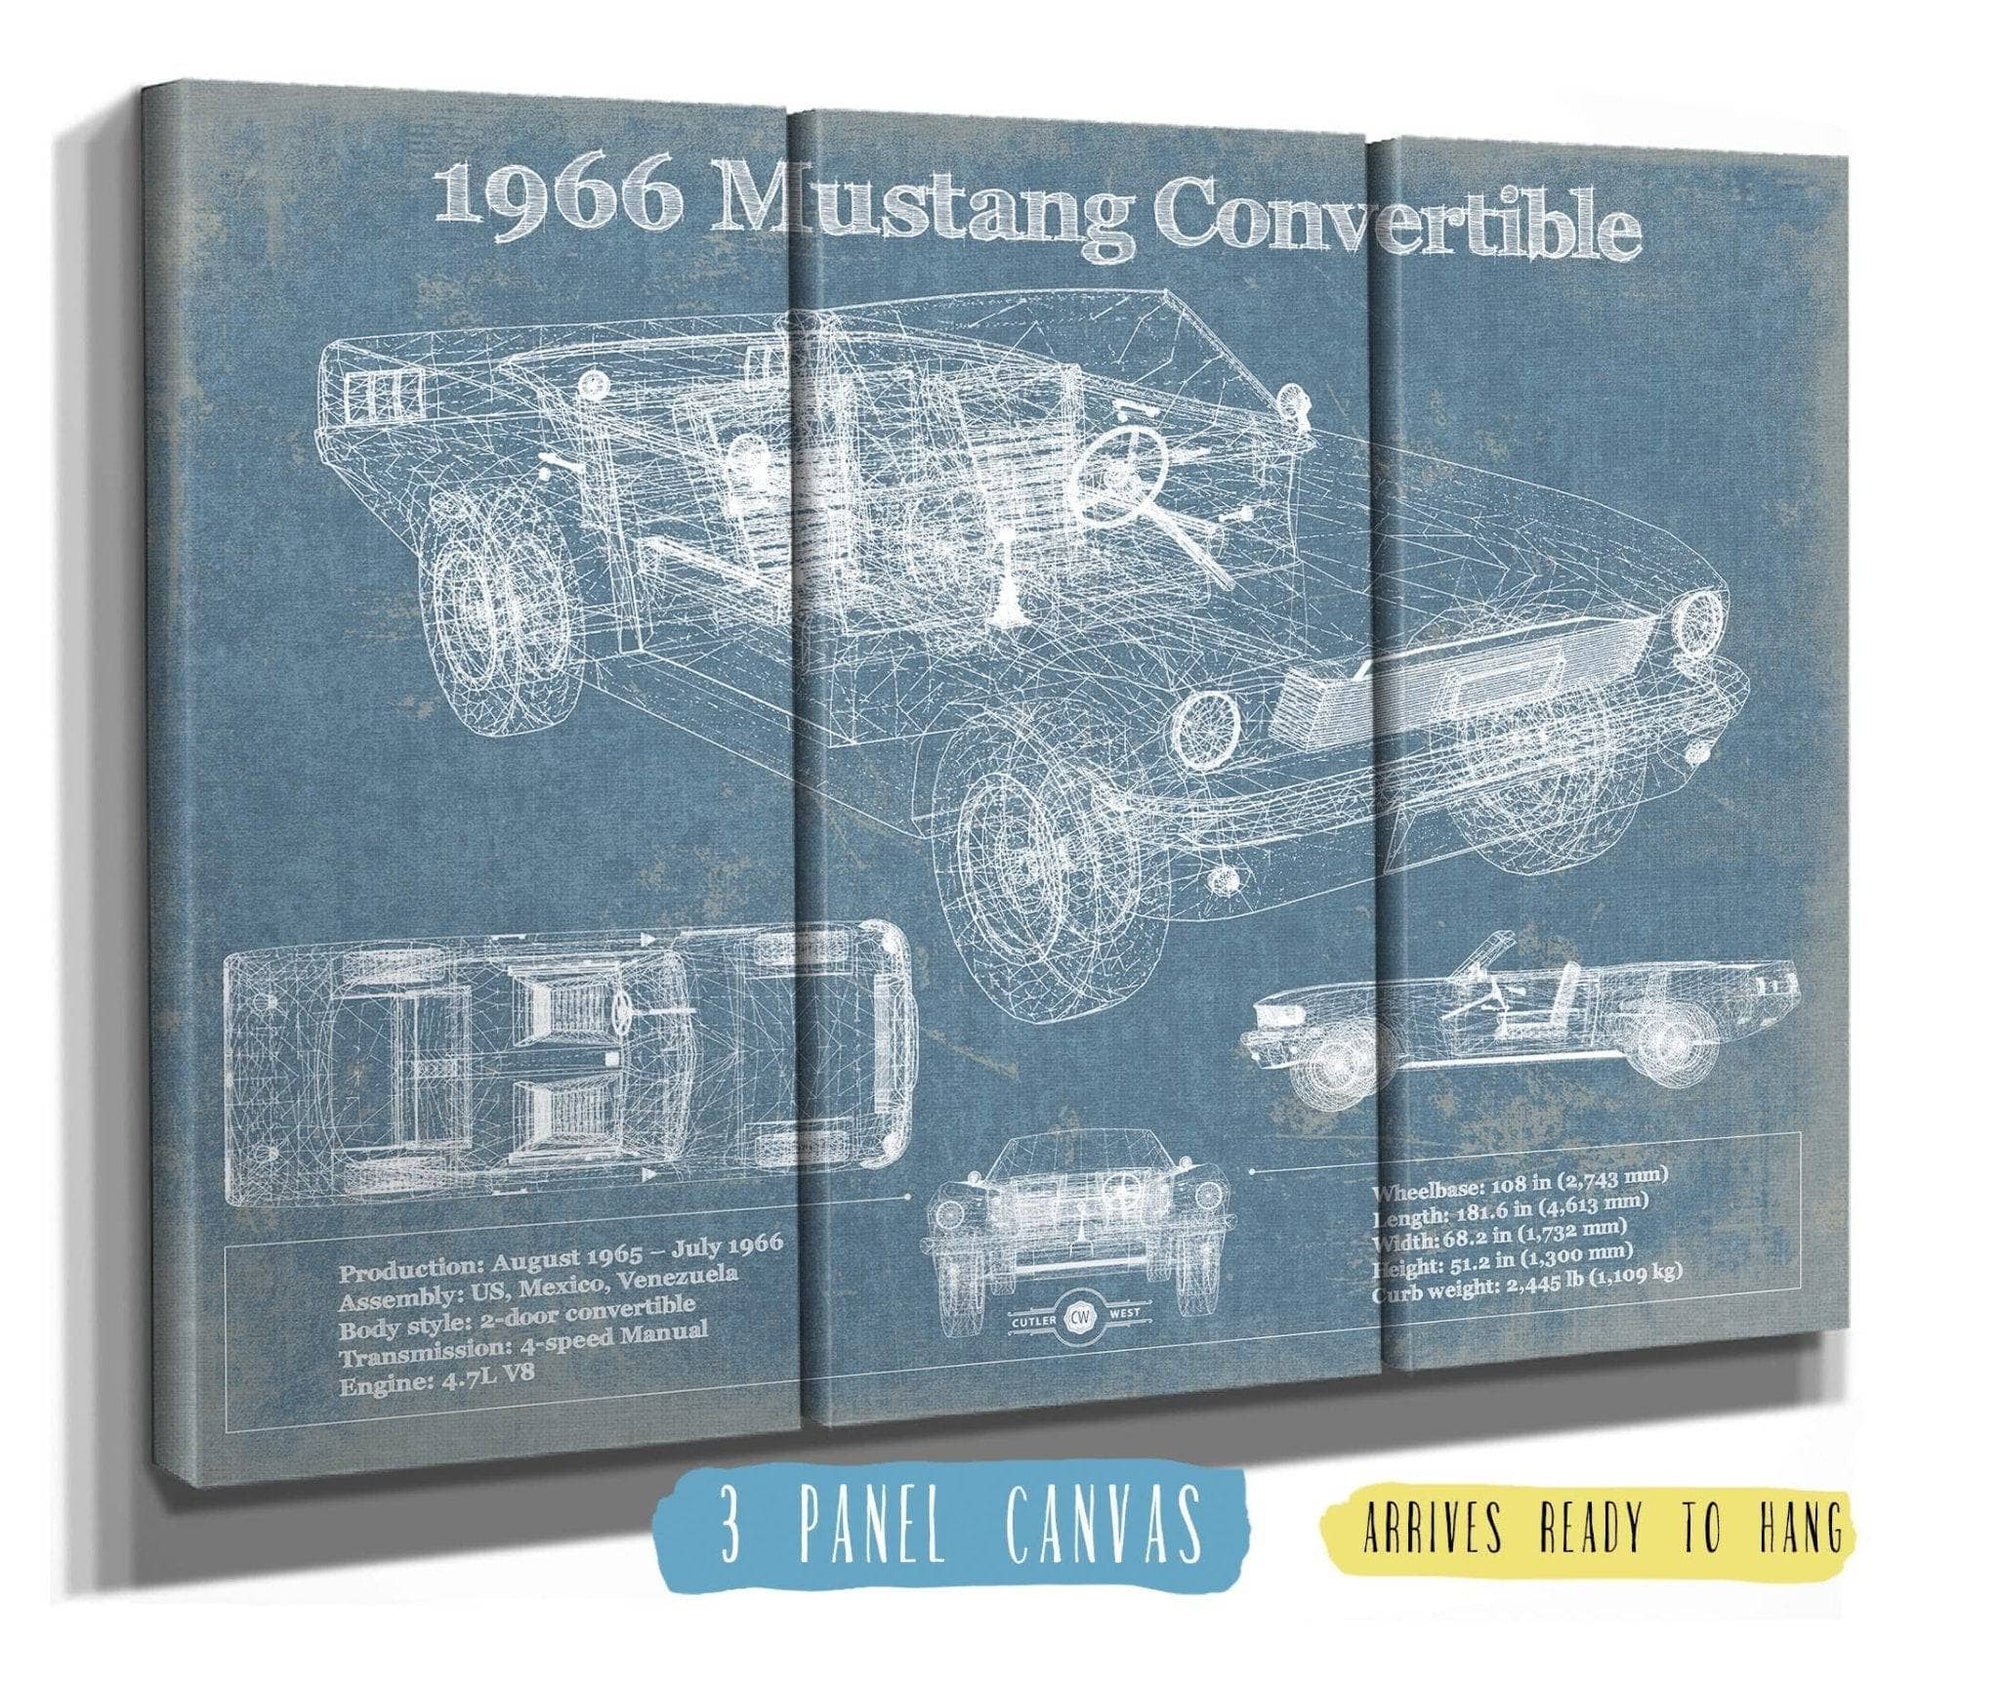 Cutler West Ford Collection 48" x 32" / 3 Panel Canvas Wrap Ford Mustang 1966 Original Blueprint Art 93331131685390